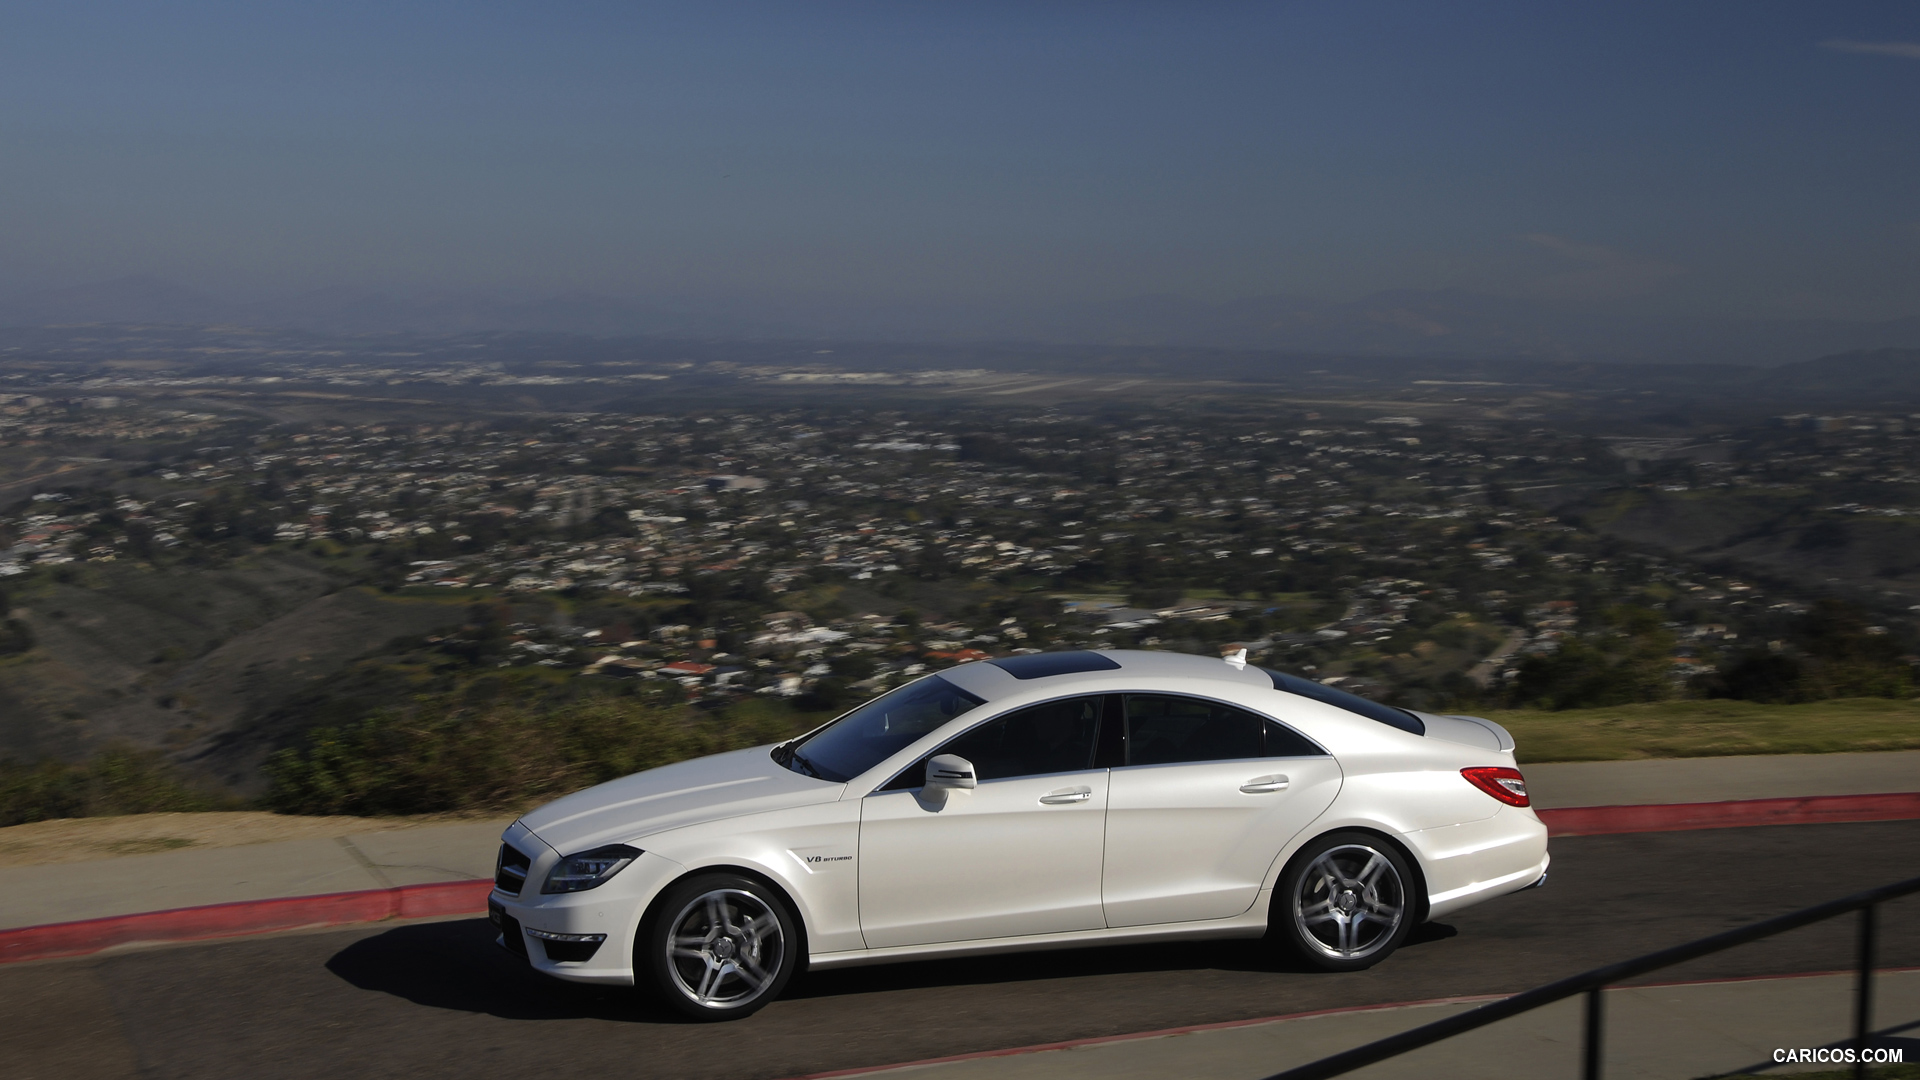 Mercedes-Benz CLS63 AMG (2012) US-Version - Diamond White - Side, #12 of 100